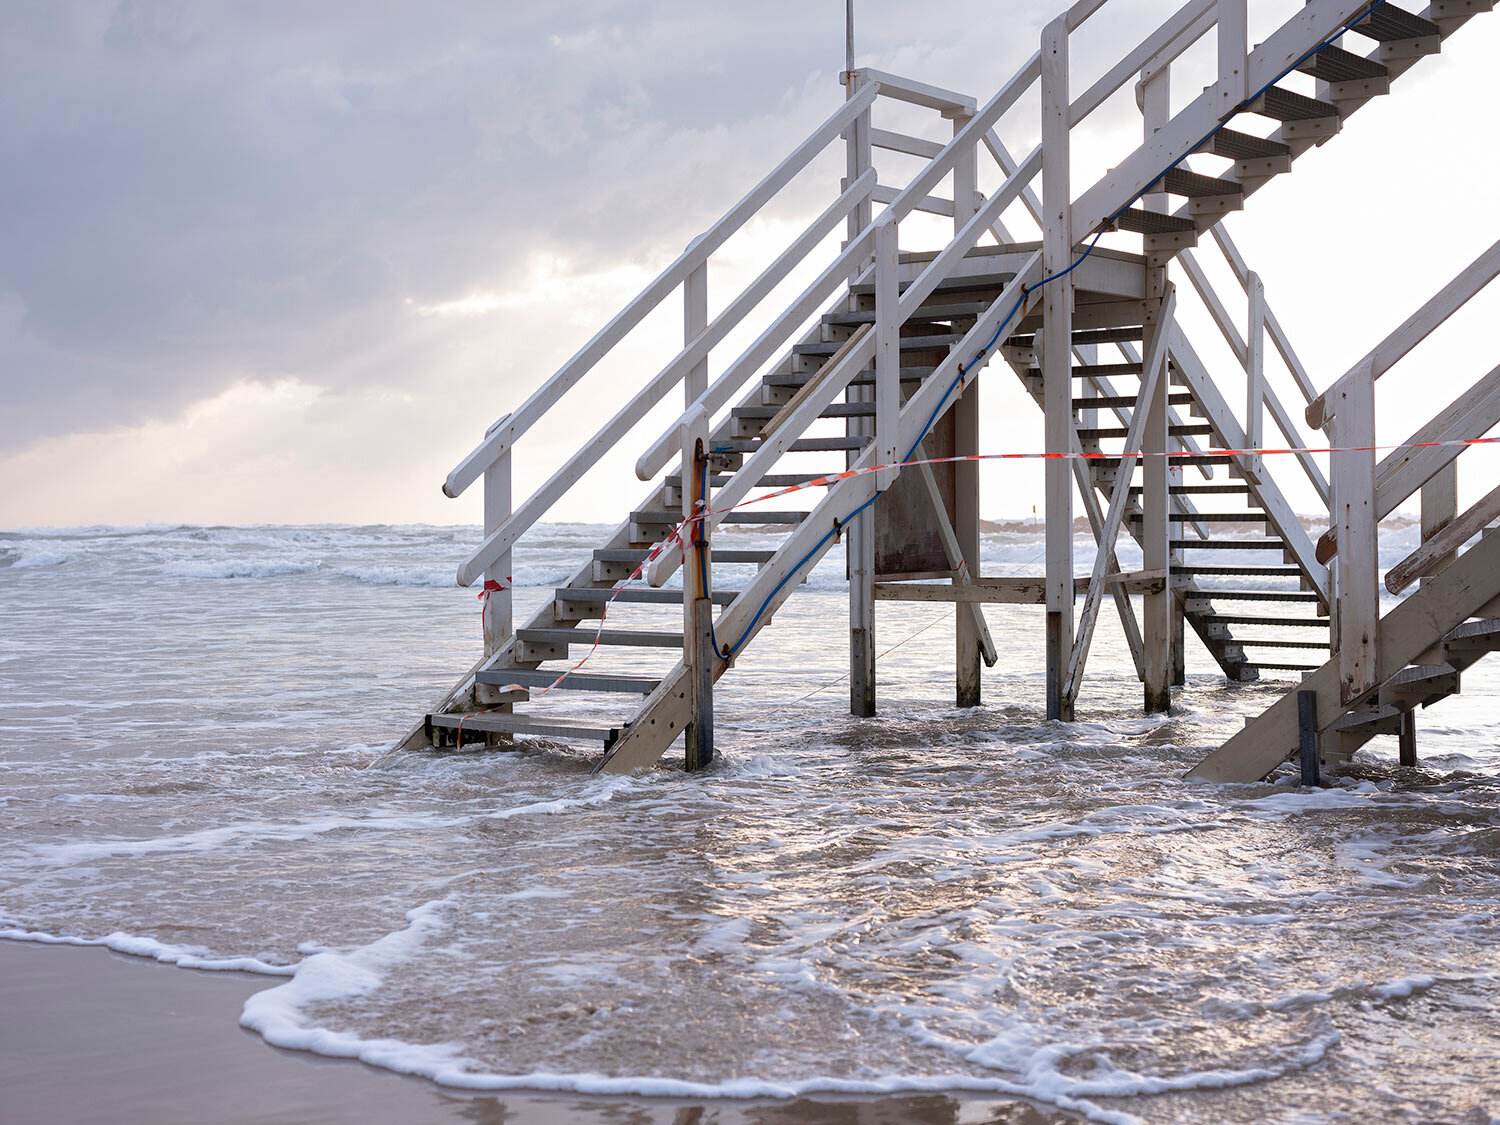  This Thursday, March 19, 2020 photo shows stairway to lifeguard tower at Tel Aviv's beachfront wrapped in tape to prevent public access. (AP Photo/Oded Balilty) 